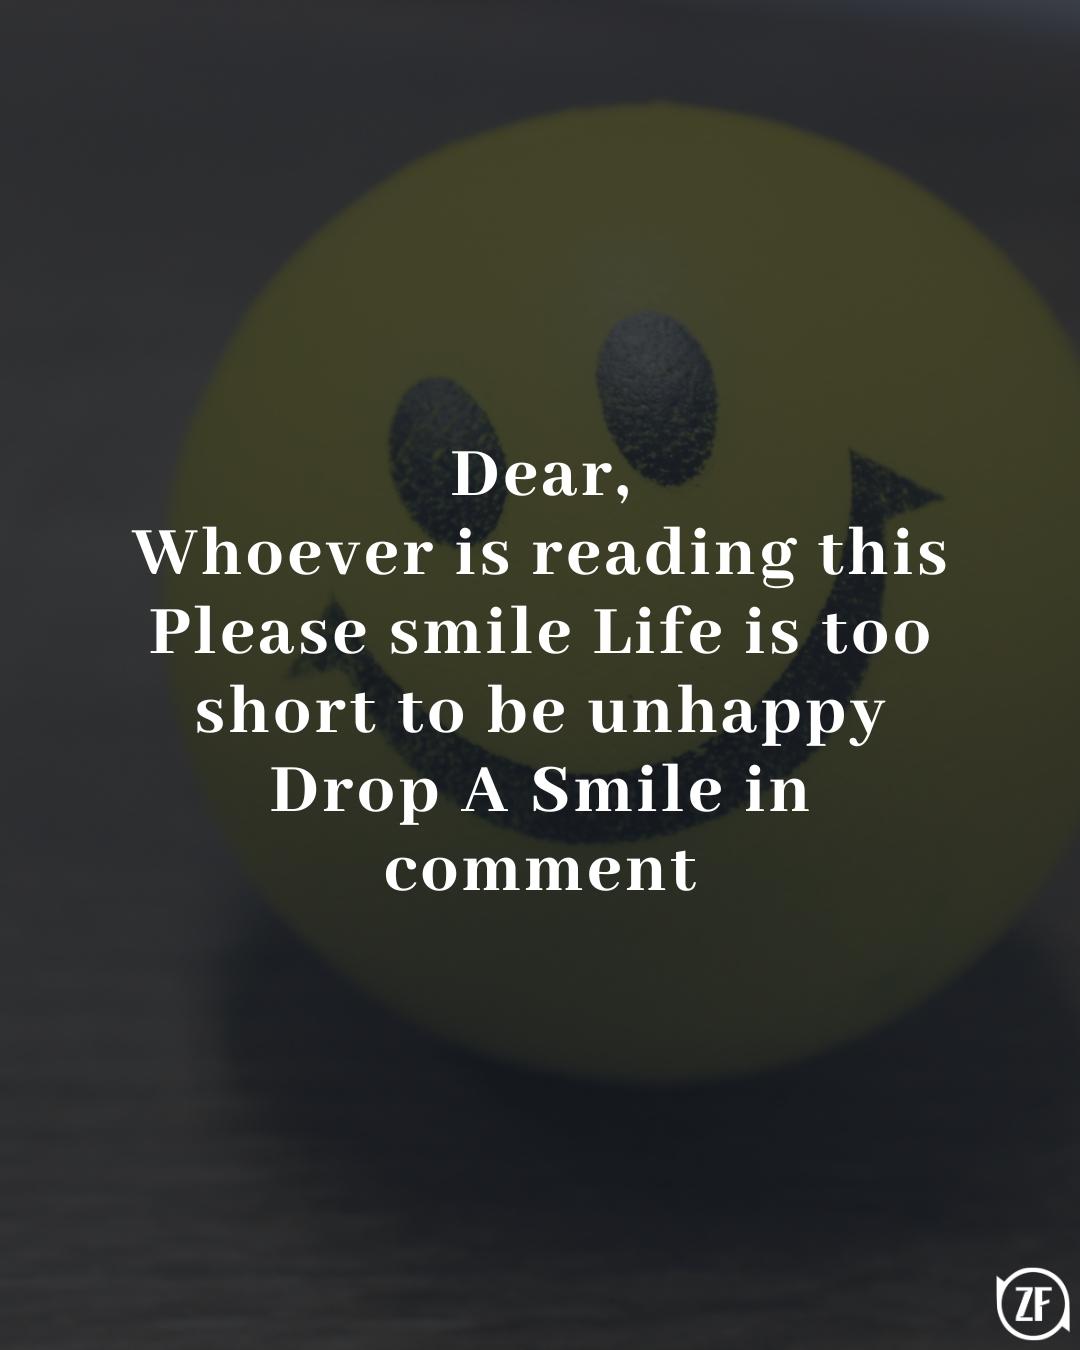 Dear, Whoever is reading this Please smile Life is too short to be unhappy Drop A Smile in comment